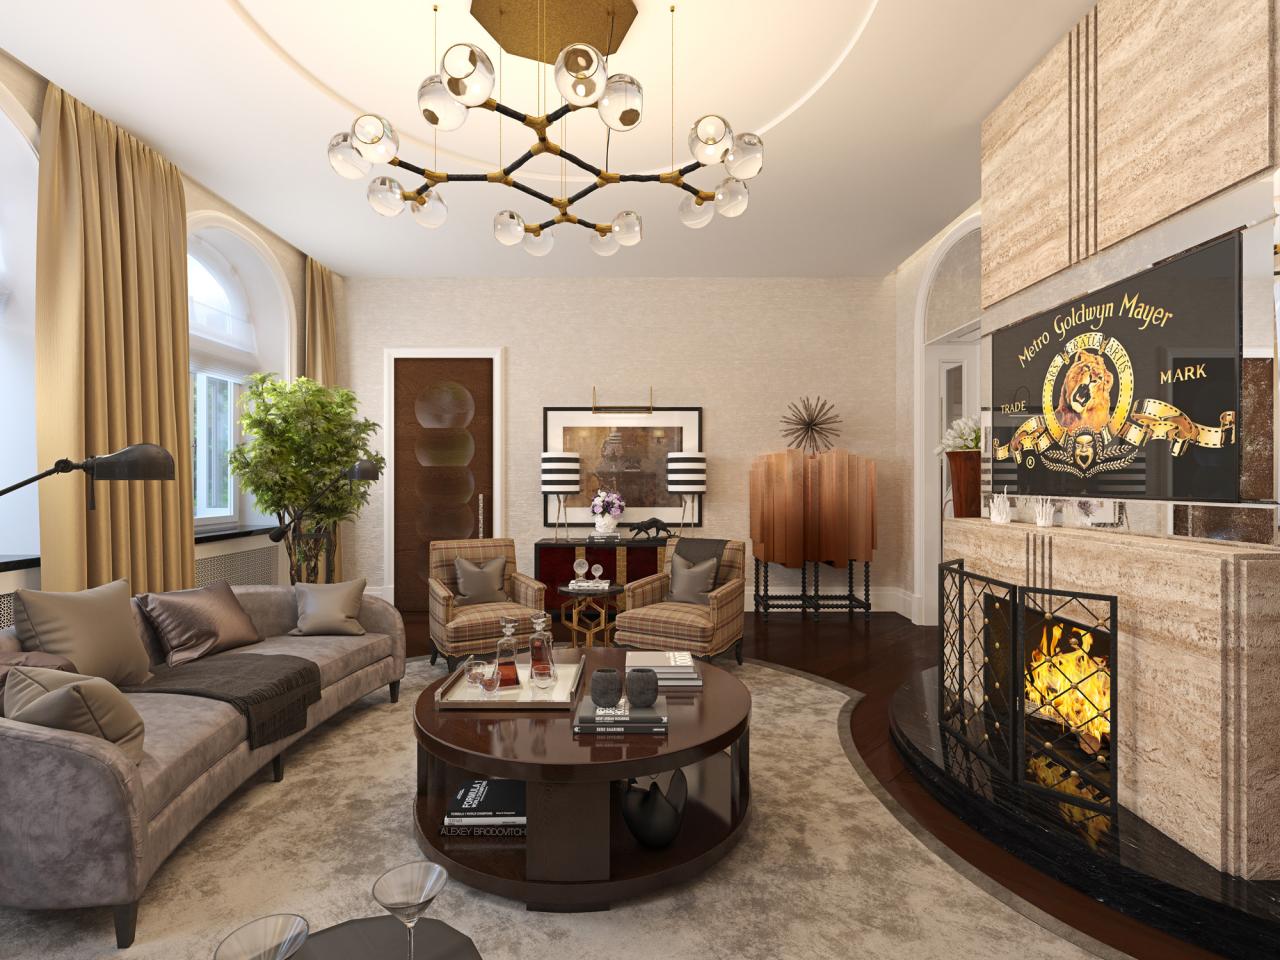 Luxurious Living Room Design Ideas for a Sophisticated Home